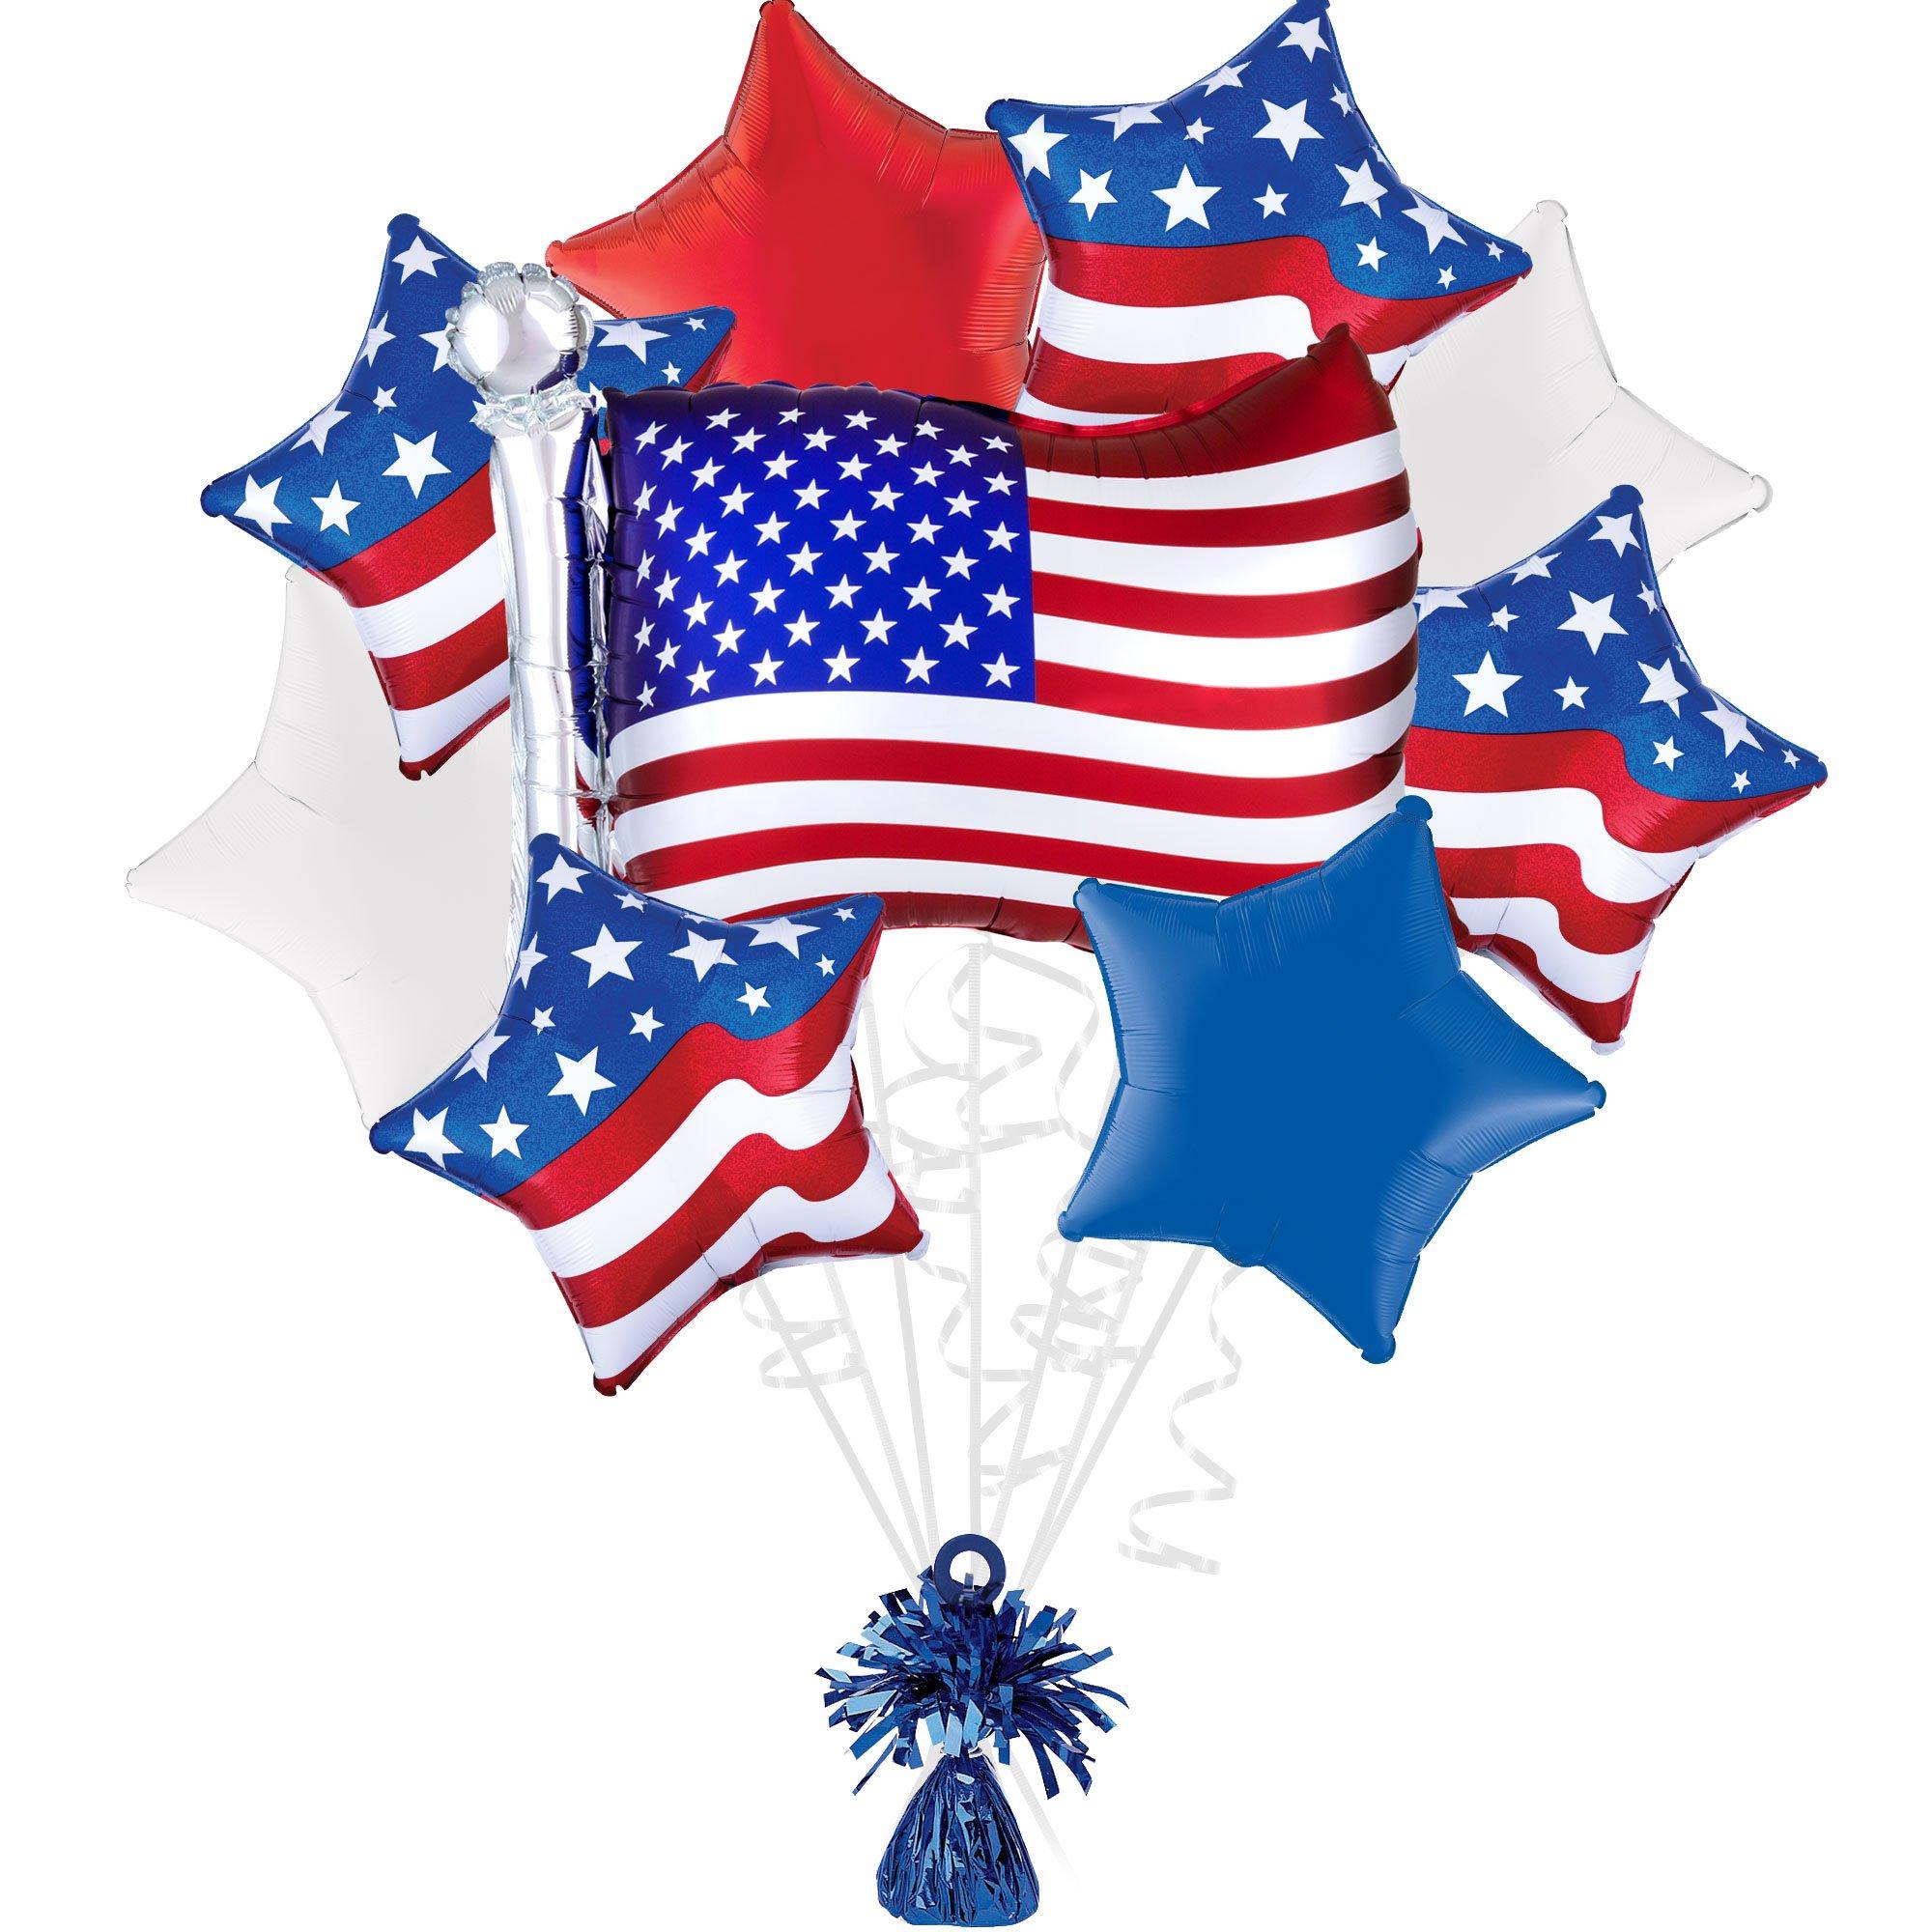 Patriotic Foil Balloon Bouquet with Balloon Weight